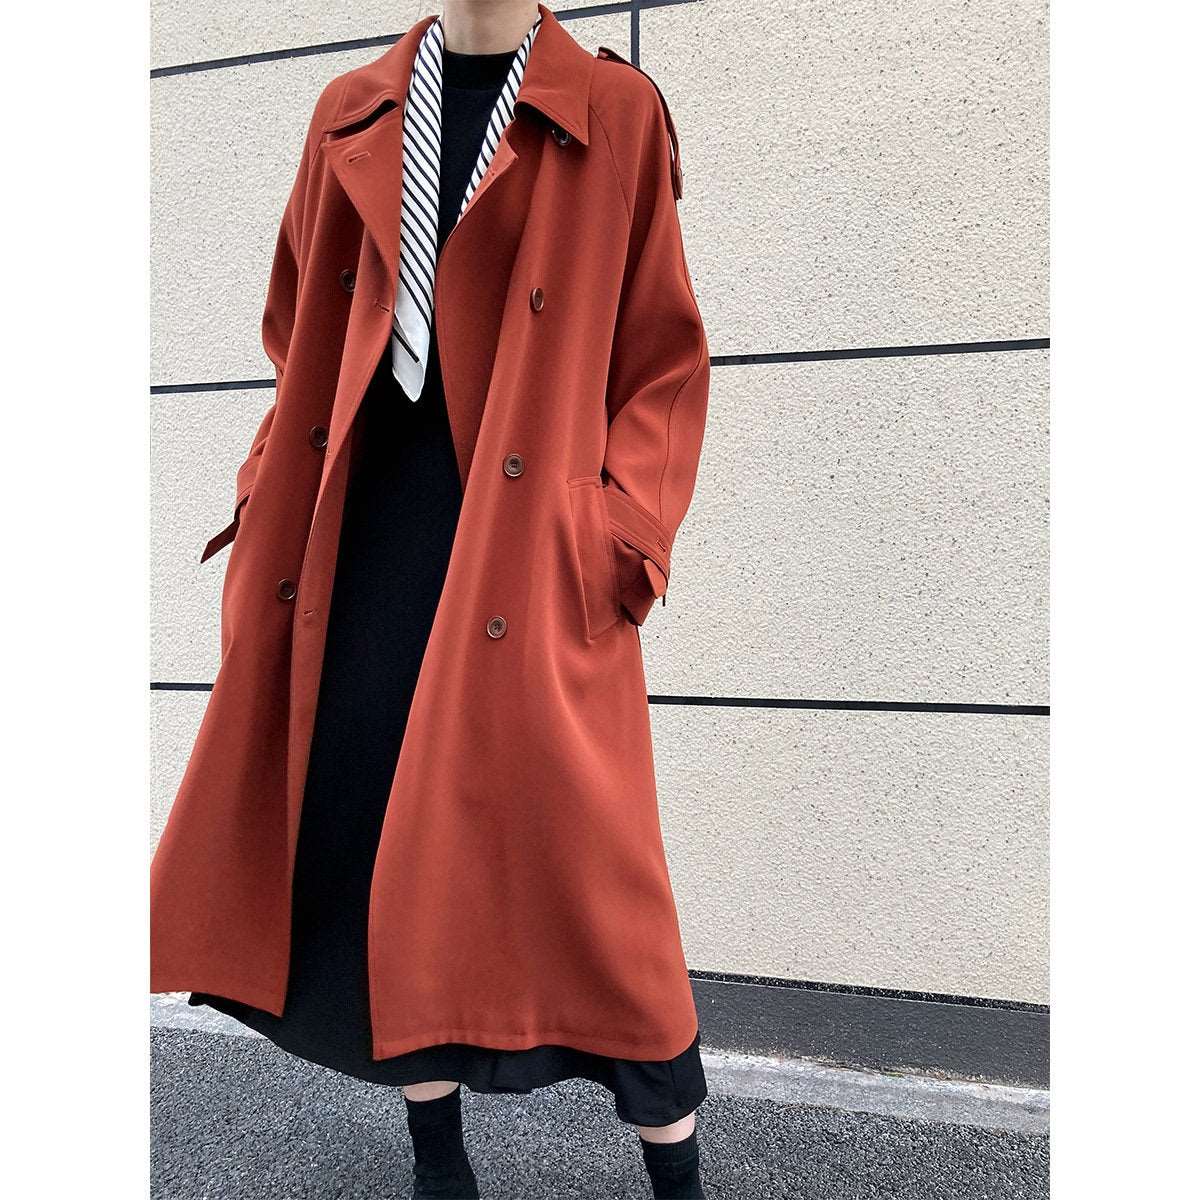 Women's Double Breasted Long Trench Coat Datolite